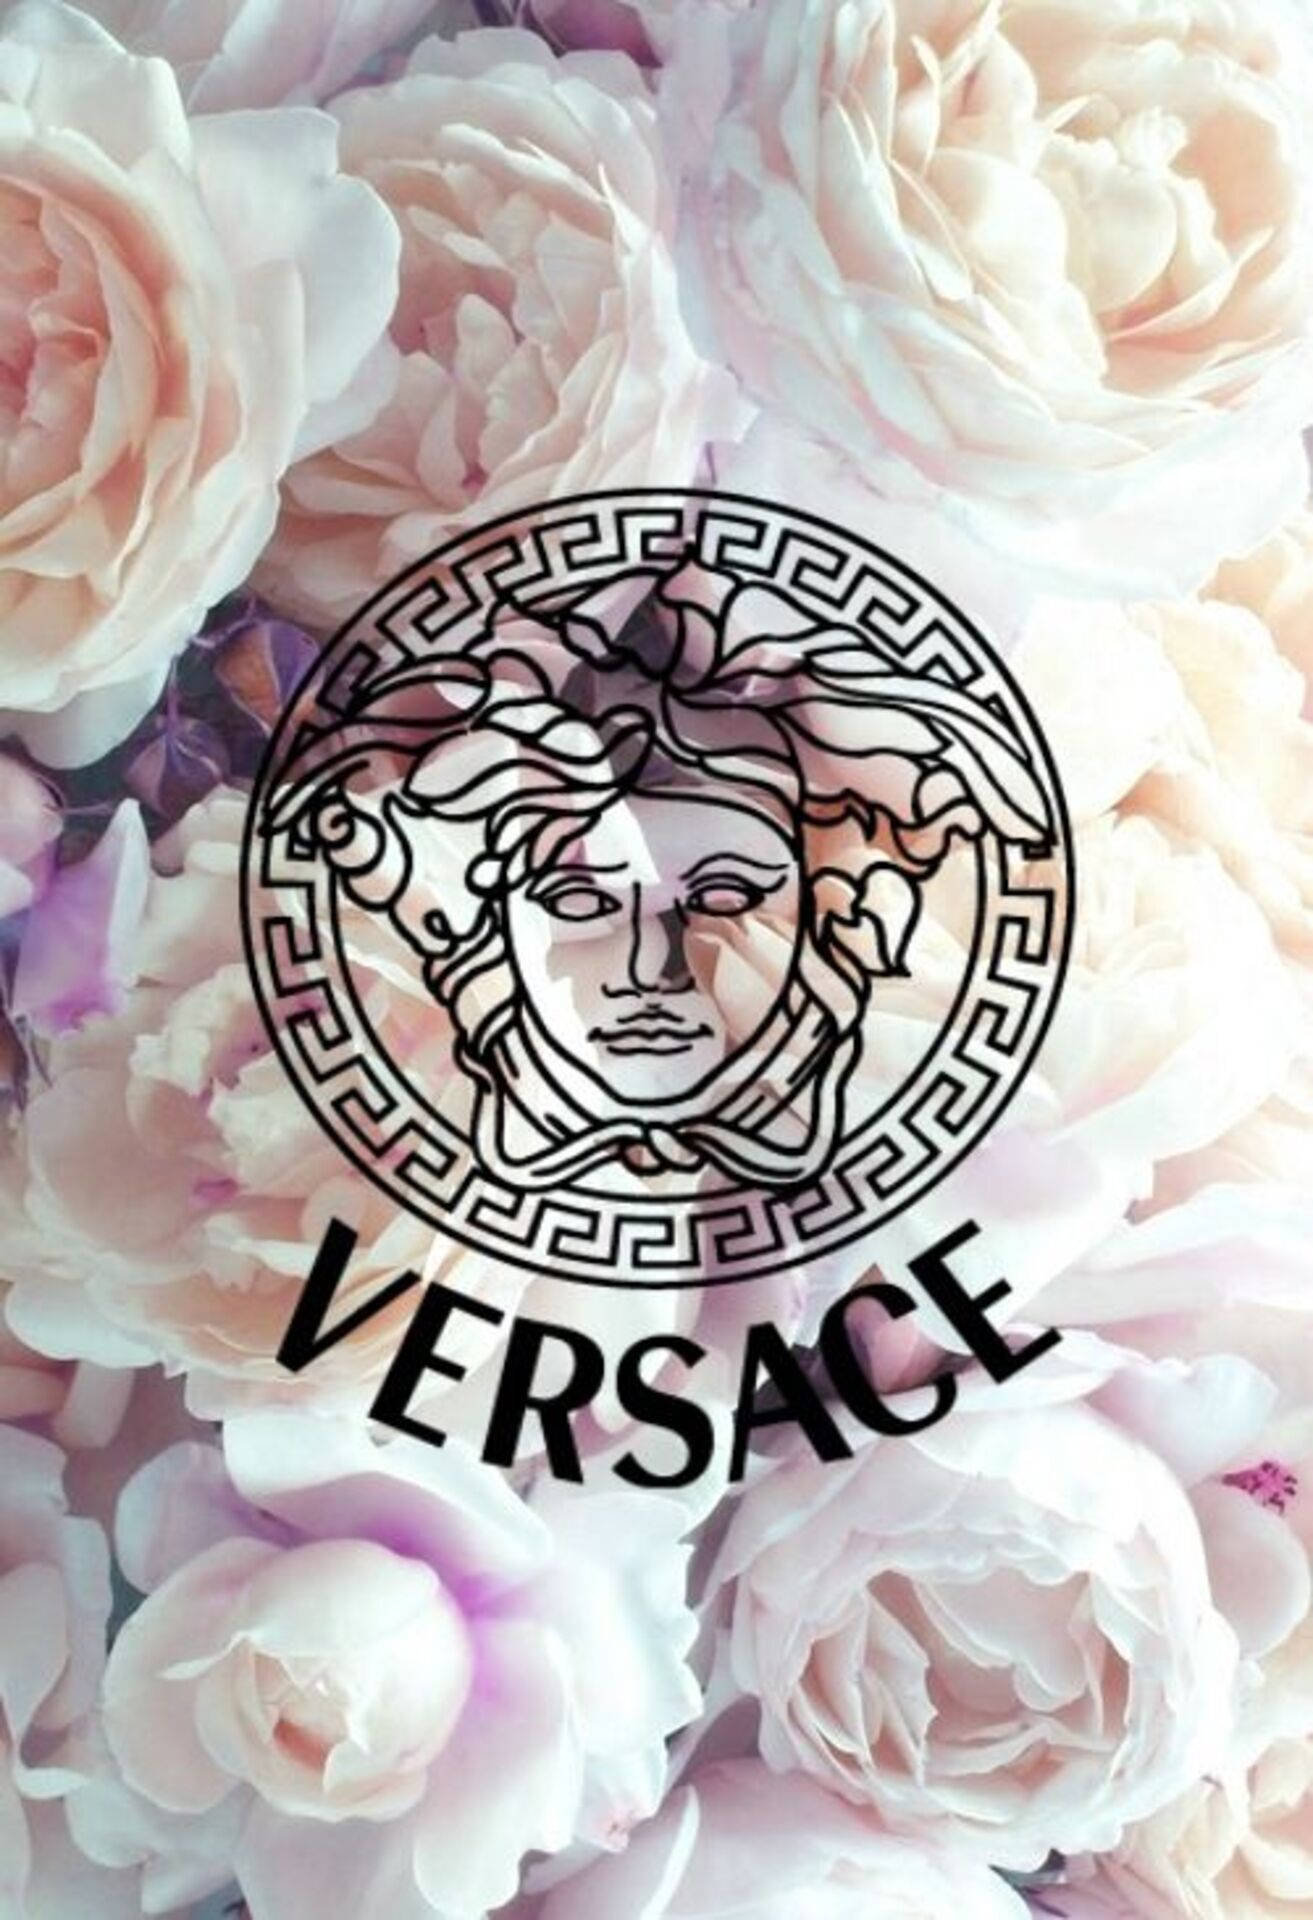 Versace's Pink Rose Look for a Fashionable Vibe Wallpaper